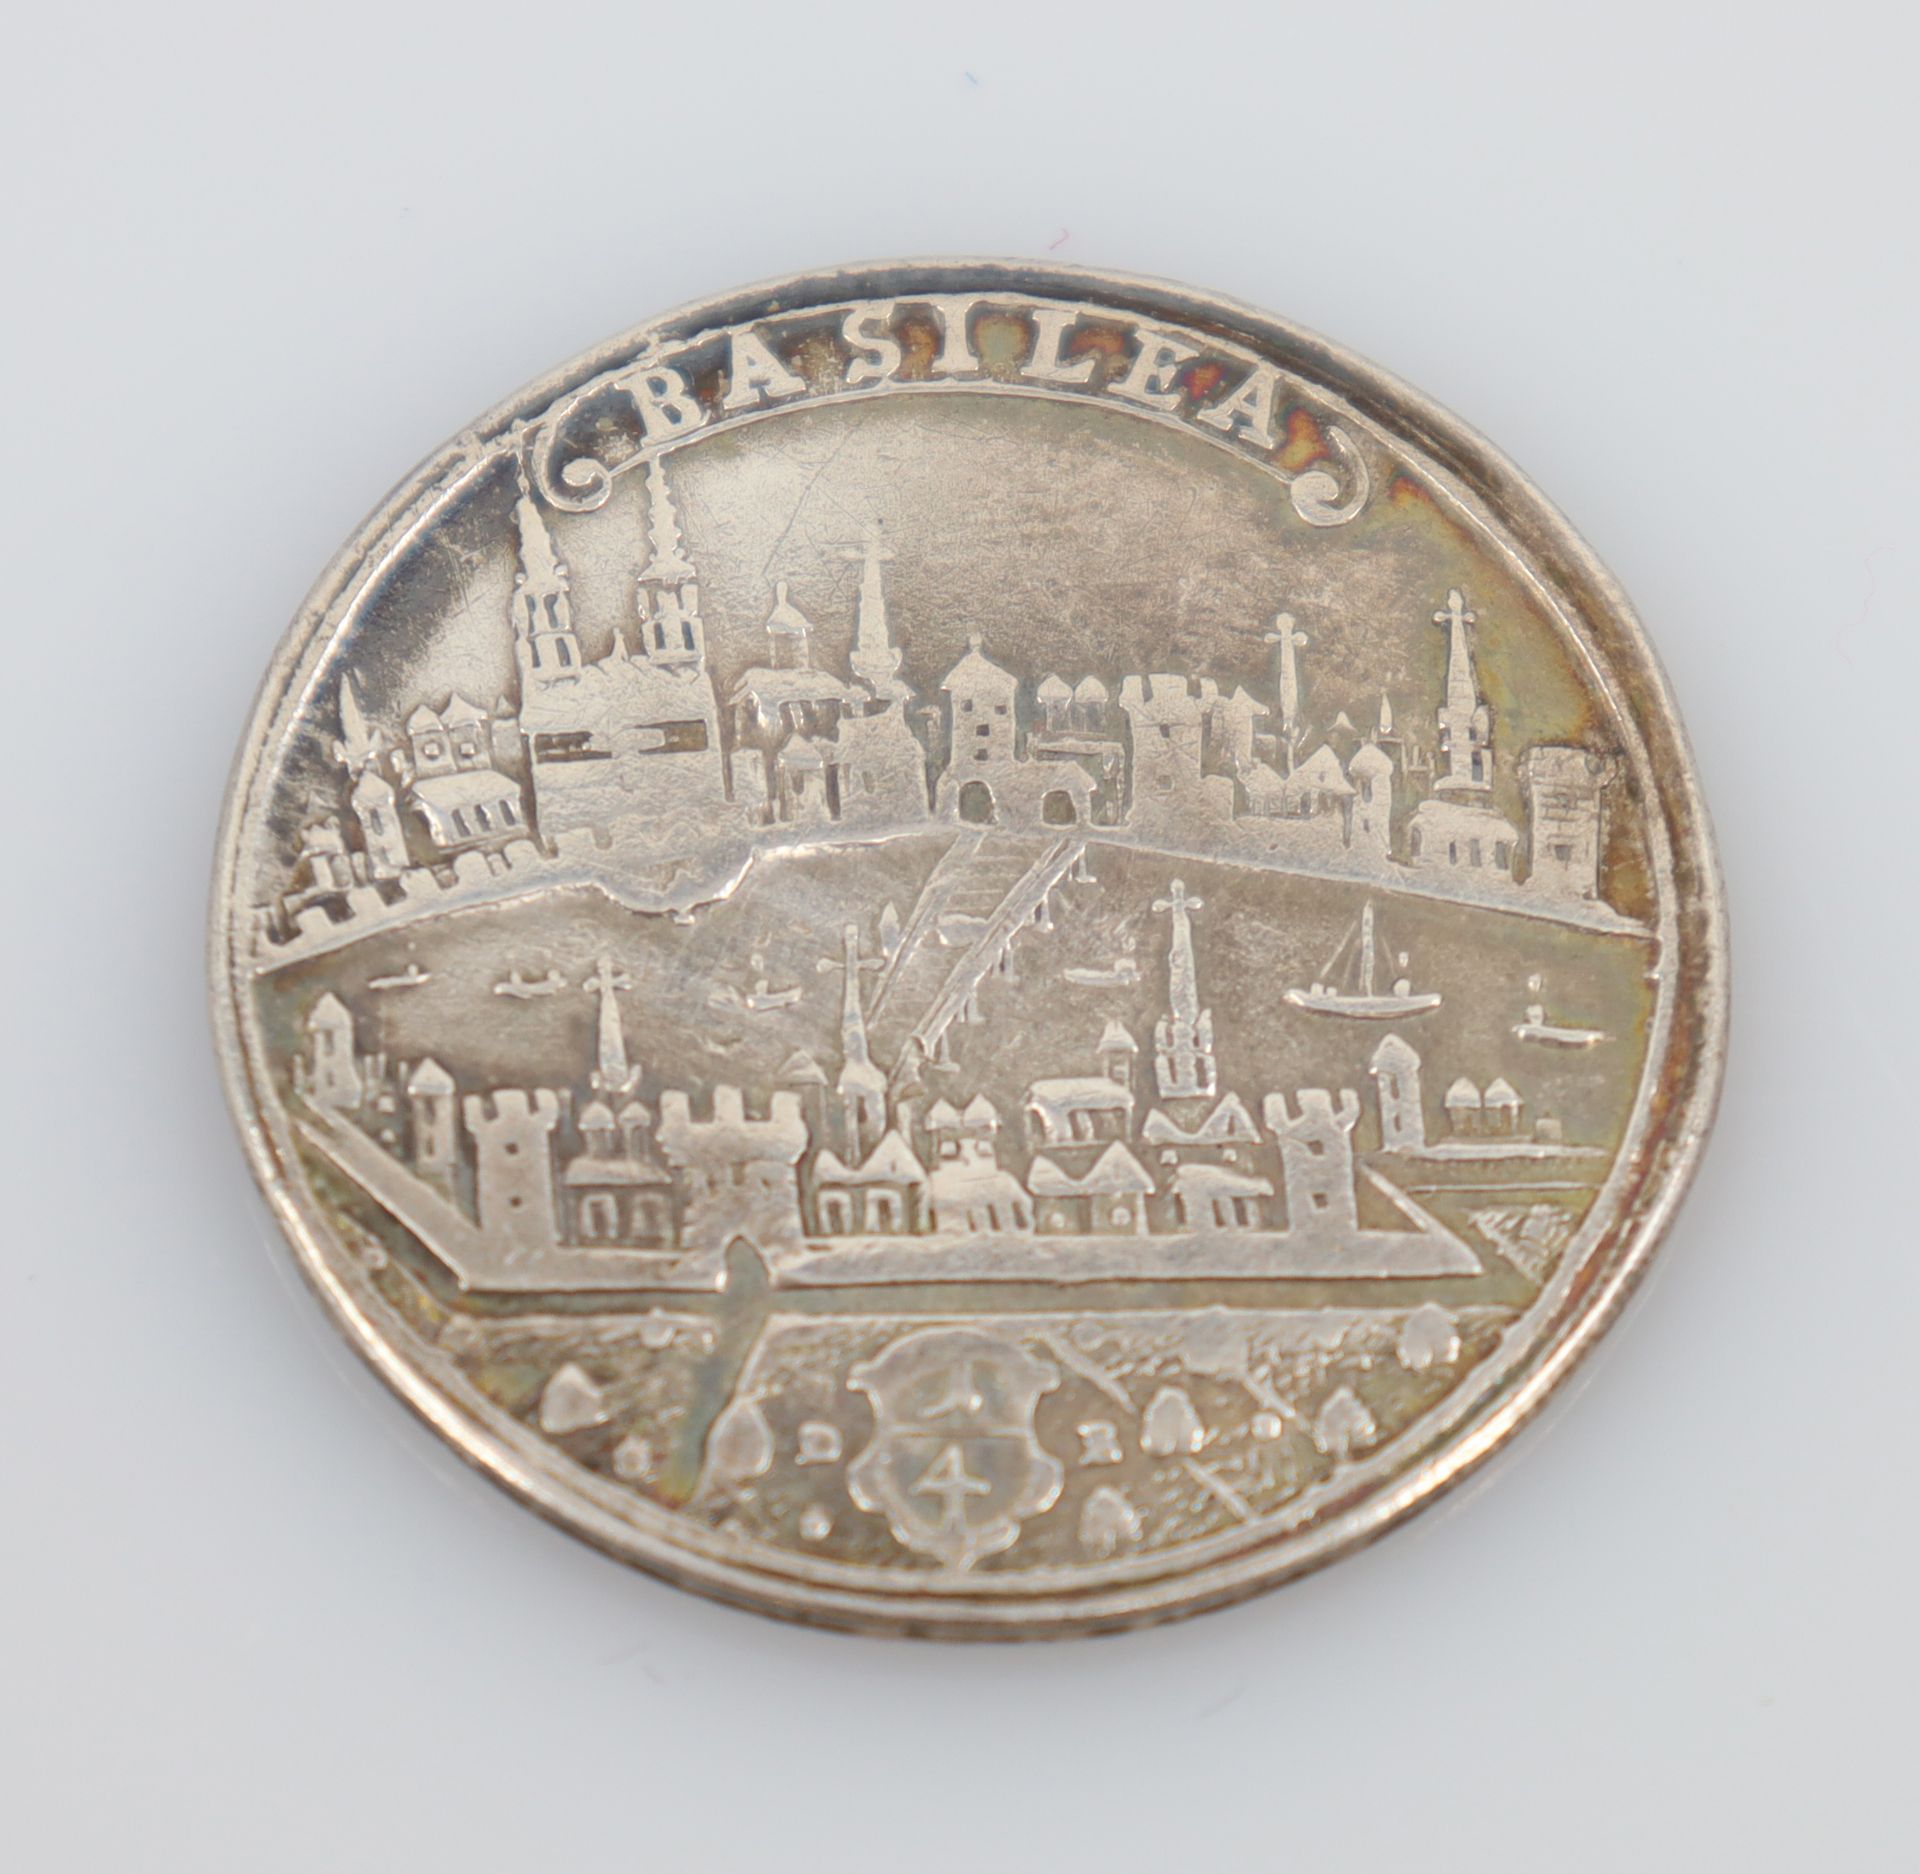 1/4 thaler. BASEL. silver coin. View of the city. Around 1740.